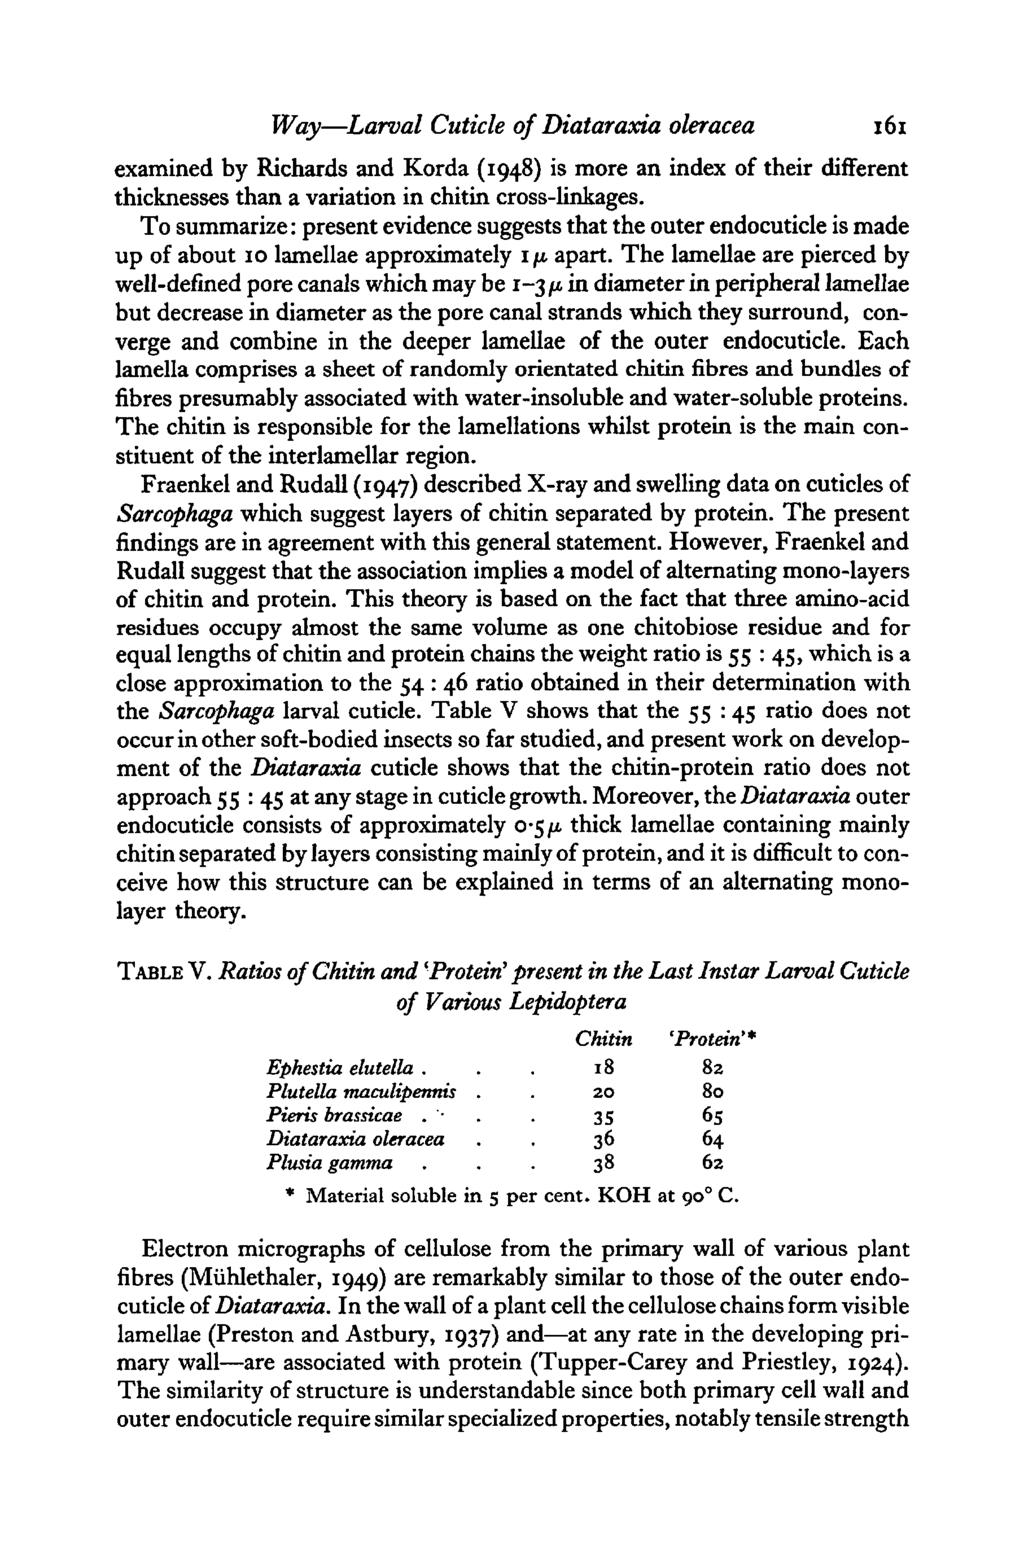 Way Larval Cuticle of Diataraxia oleracea 161 examined by Richards and Korda (1948) is more an index of their different thicknesses than a variation in chitin cross-linkages.